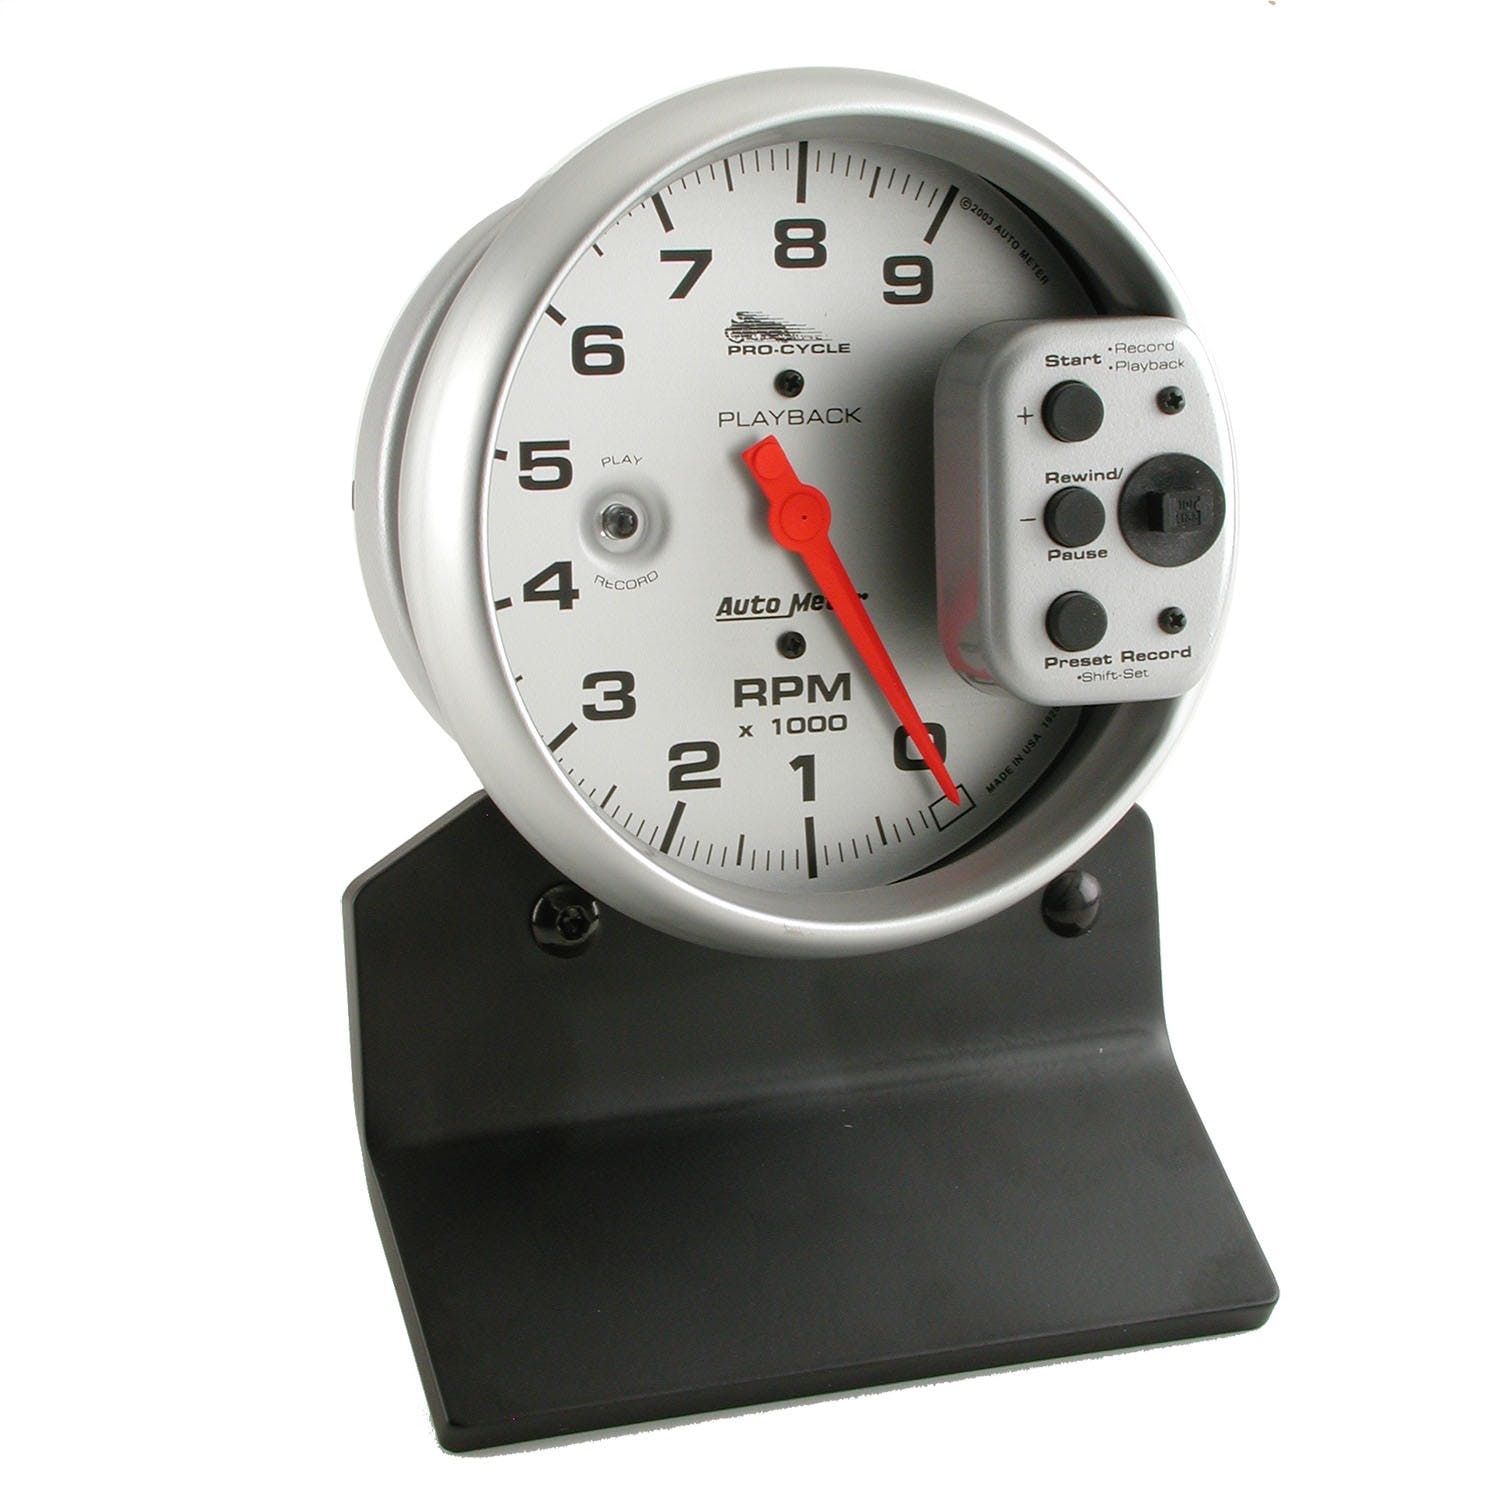 AutoMeter Products 19264 Tachometer Gauge, Silver-Pro Cycle 5, 9K RPM, Pedestal with RPM Playback